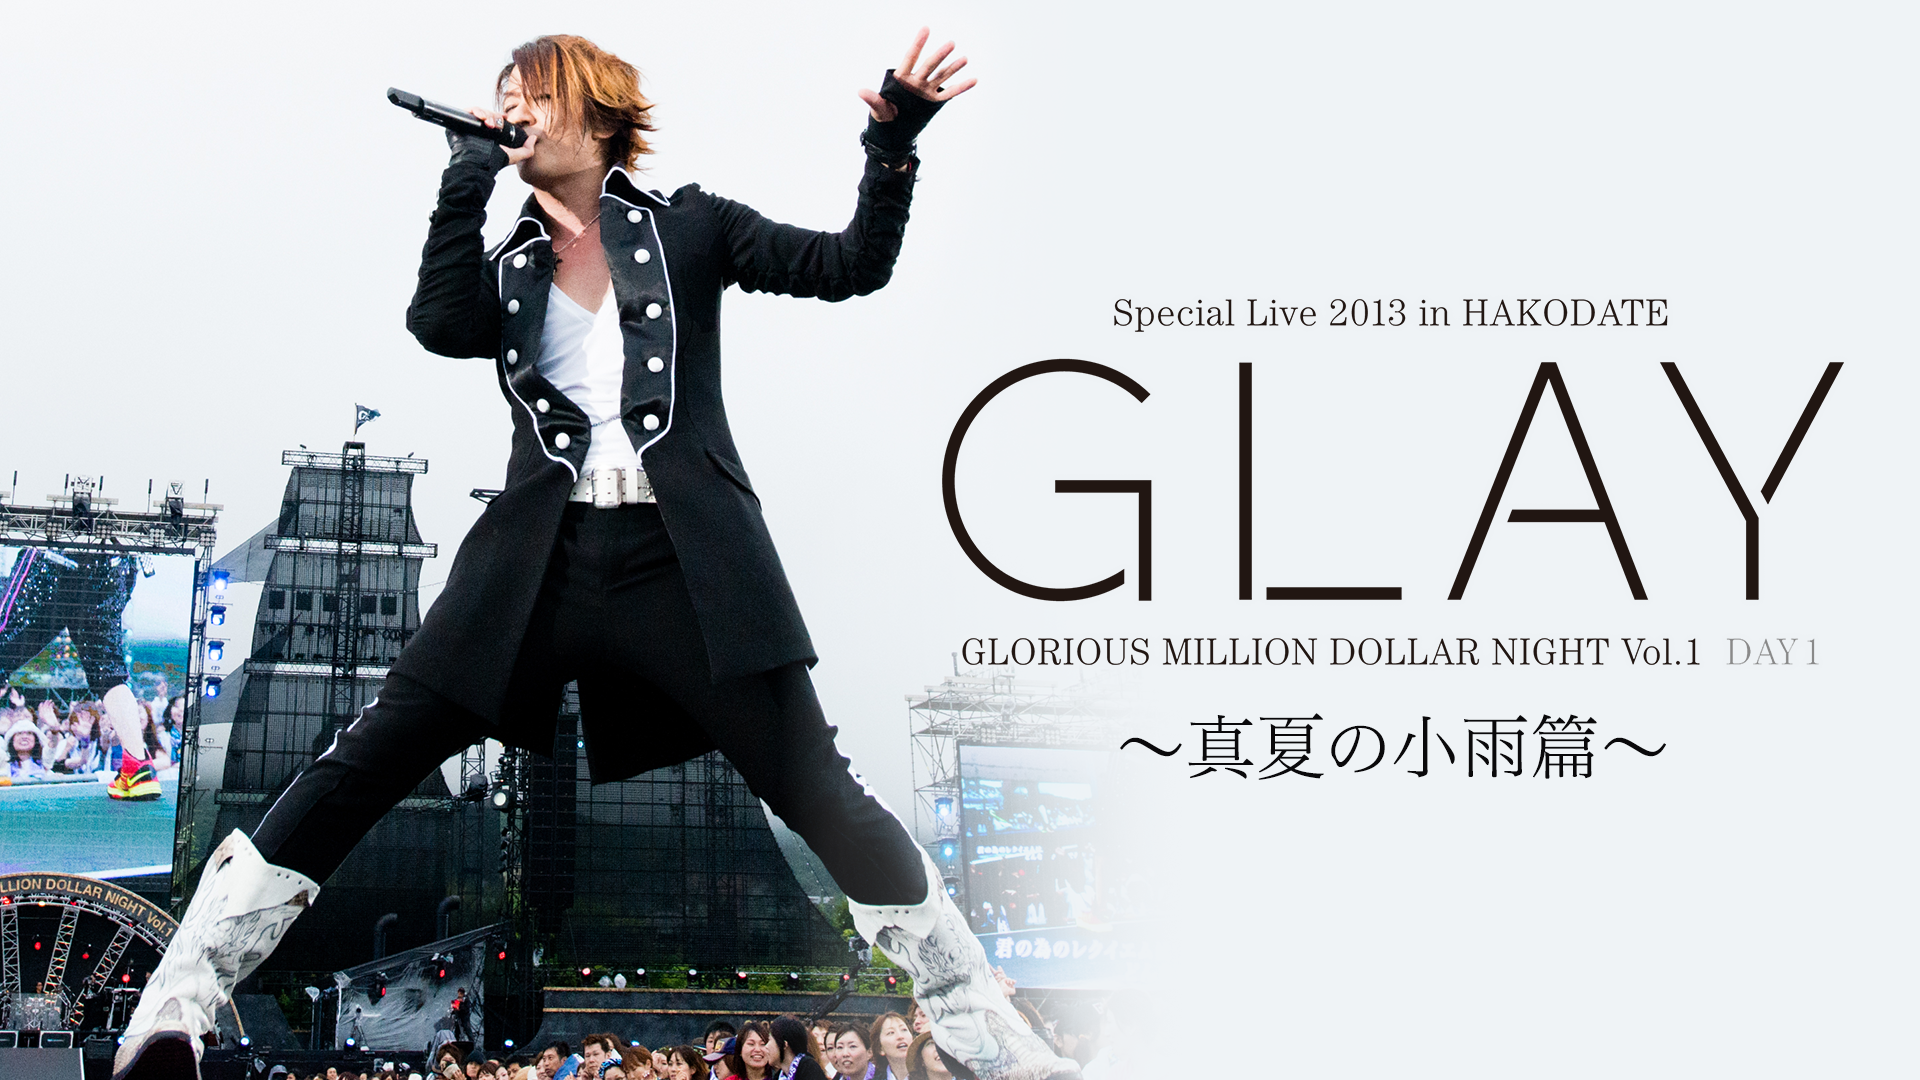 GLAY 15th Anniversary Special Live 2009 THE GREAT VACATION in 